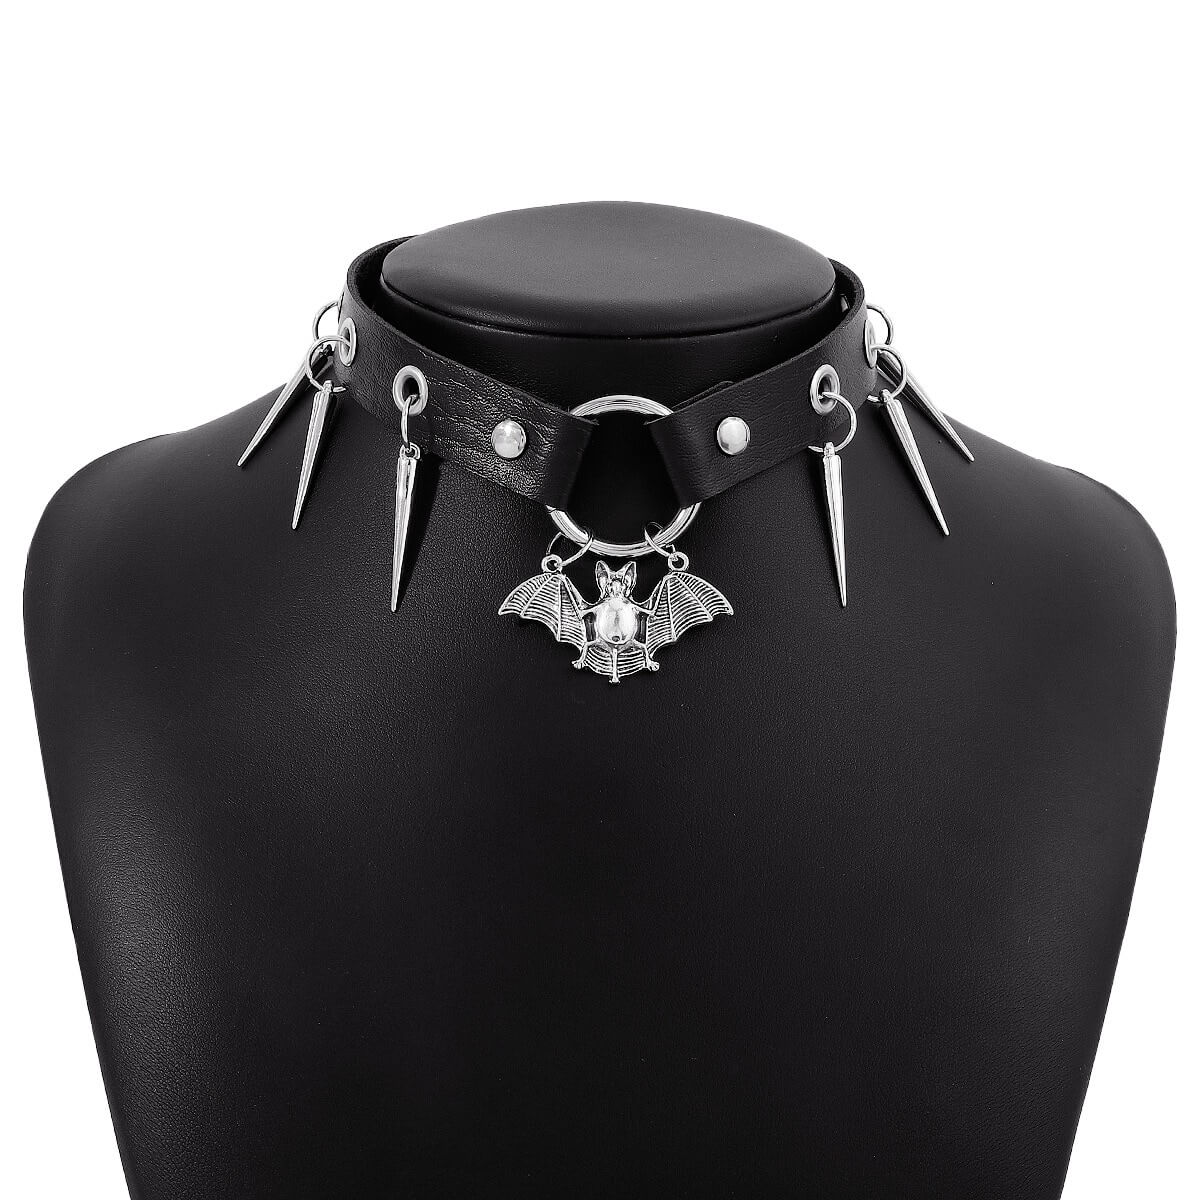 Punk Neckwear with Different Pendants for Women / Pu Leather Choker Collar with Metal Tassels - HARD'N'HEAVY